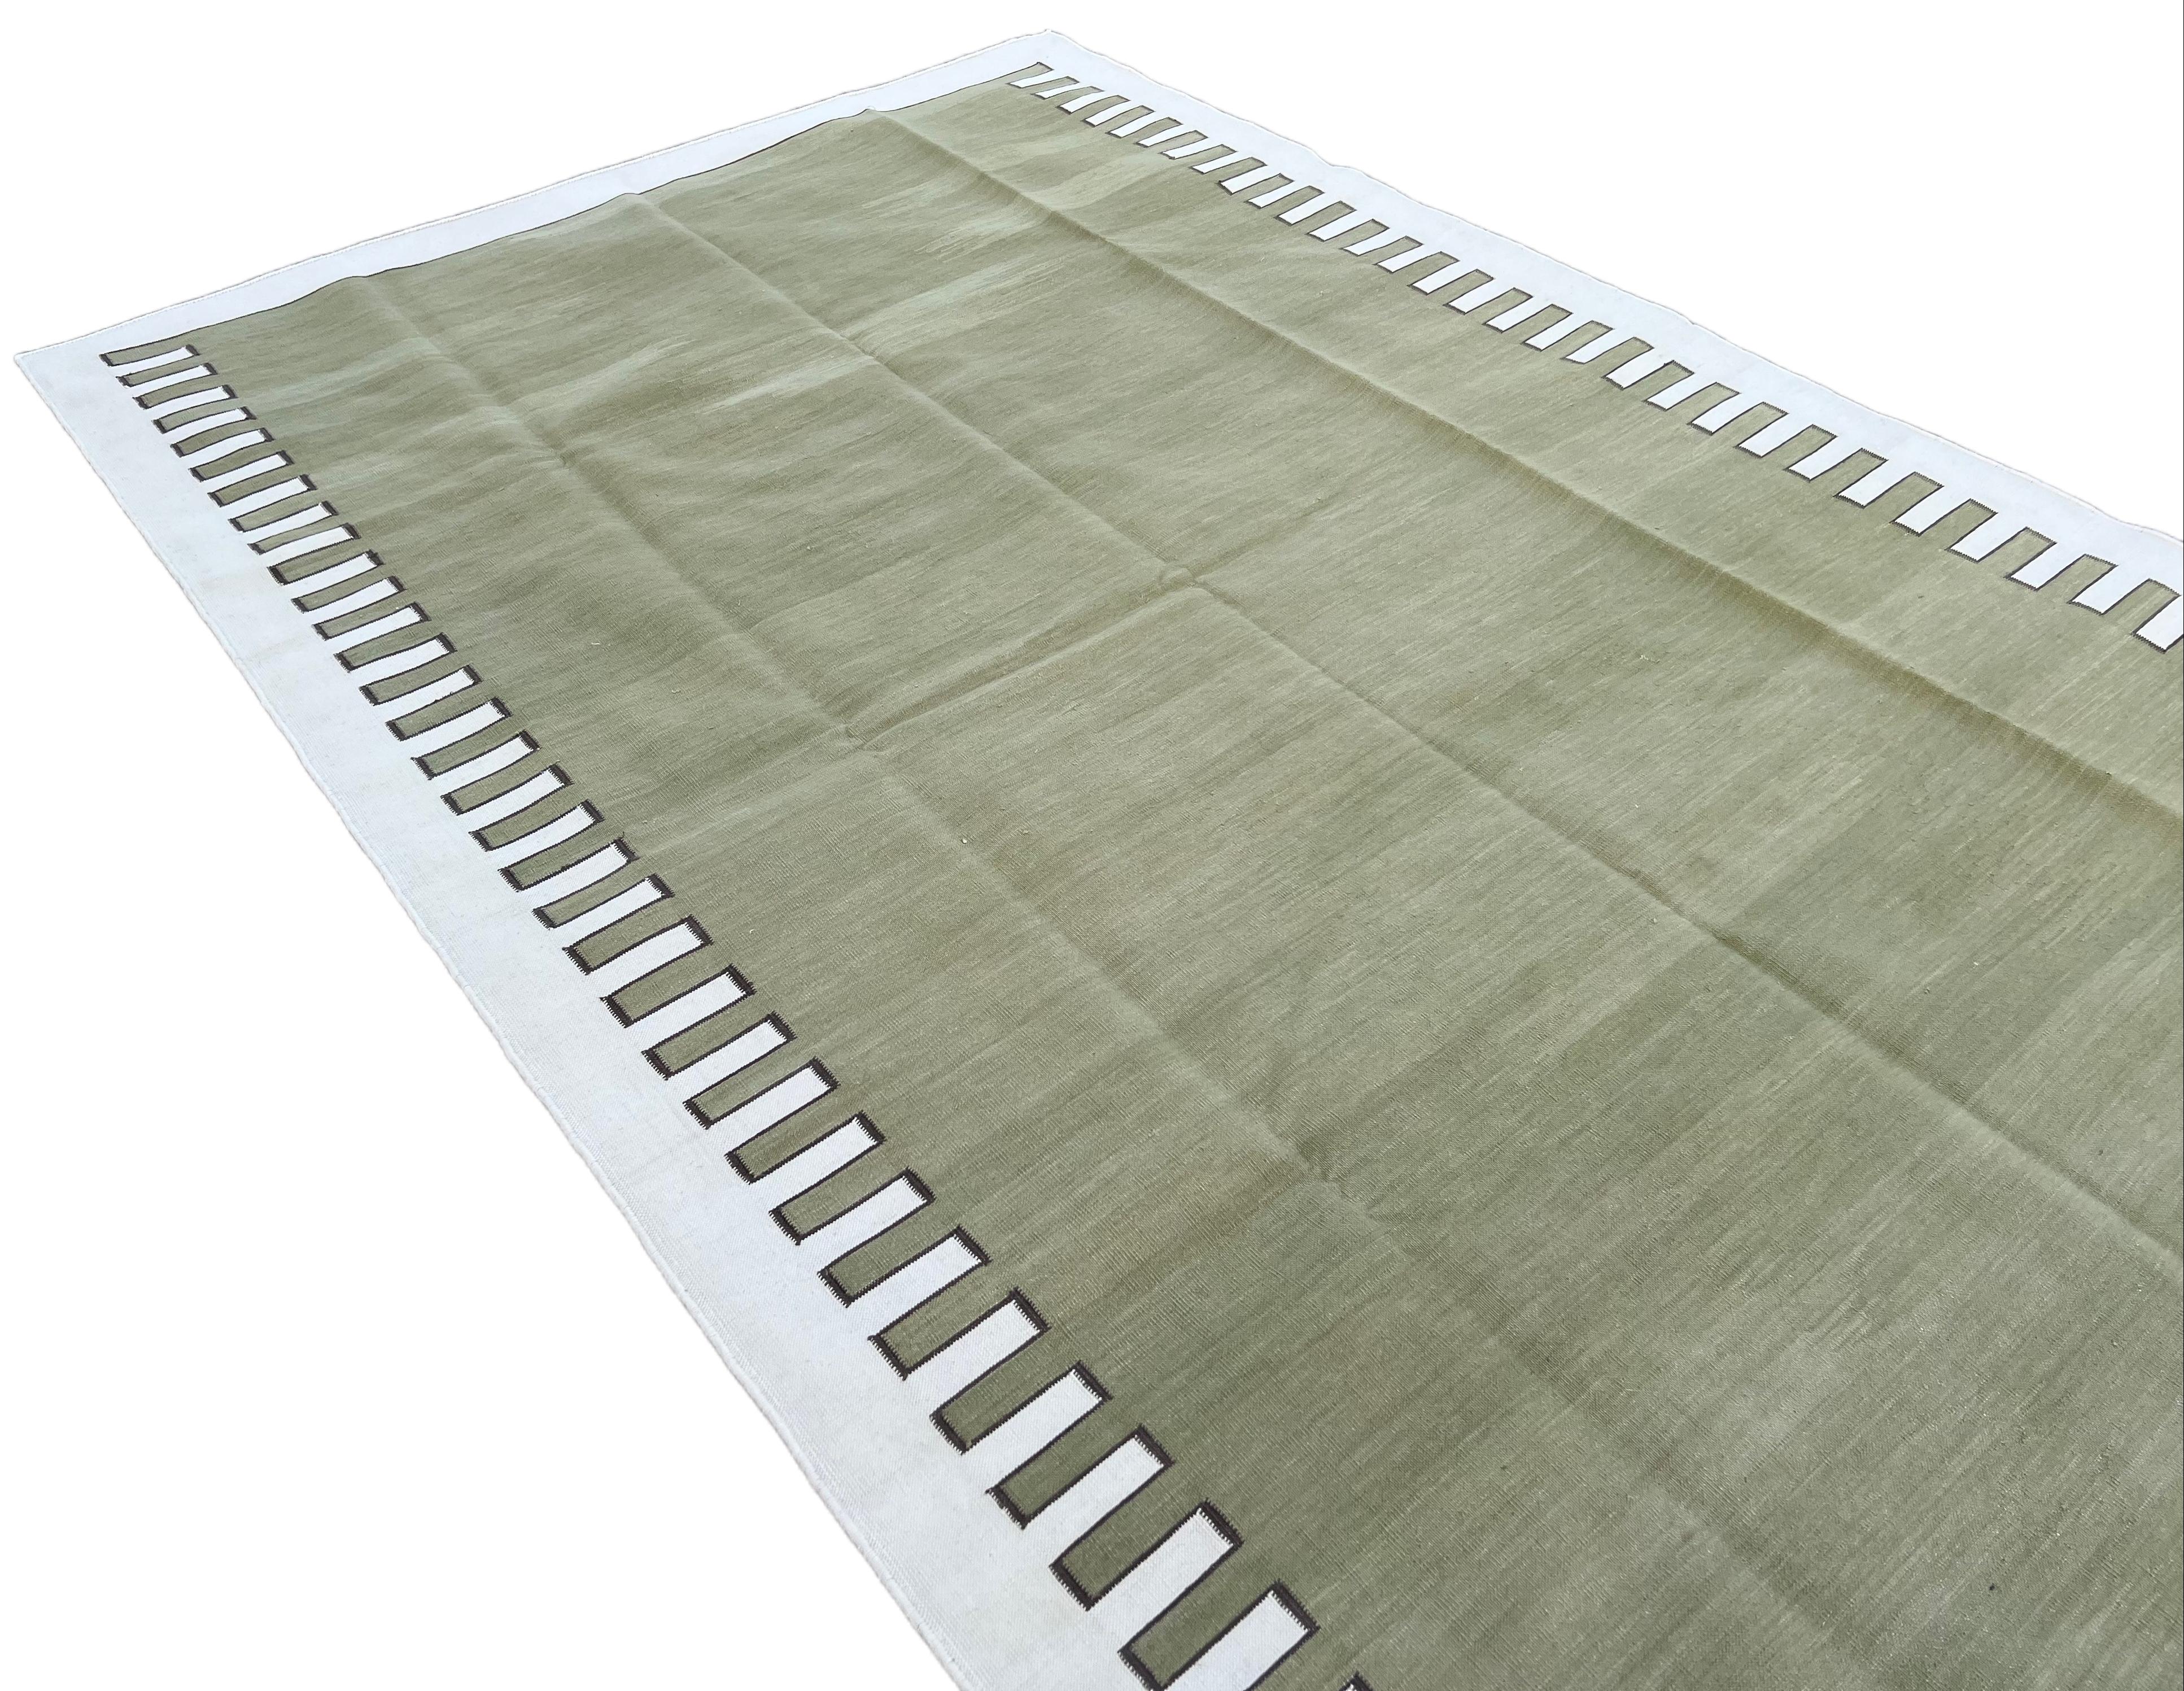 Contemporary Handmade Cotton Area Flat Weave Rug, Olive Green & Cream Zig Zag Striped Dhurrie For Sale